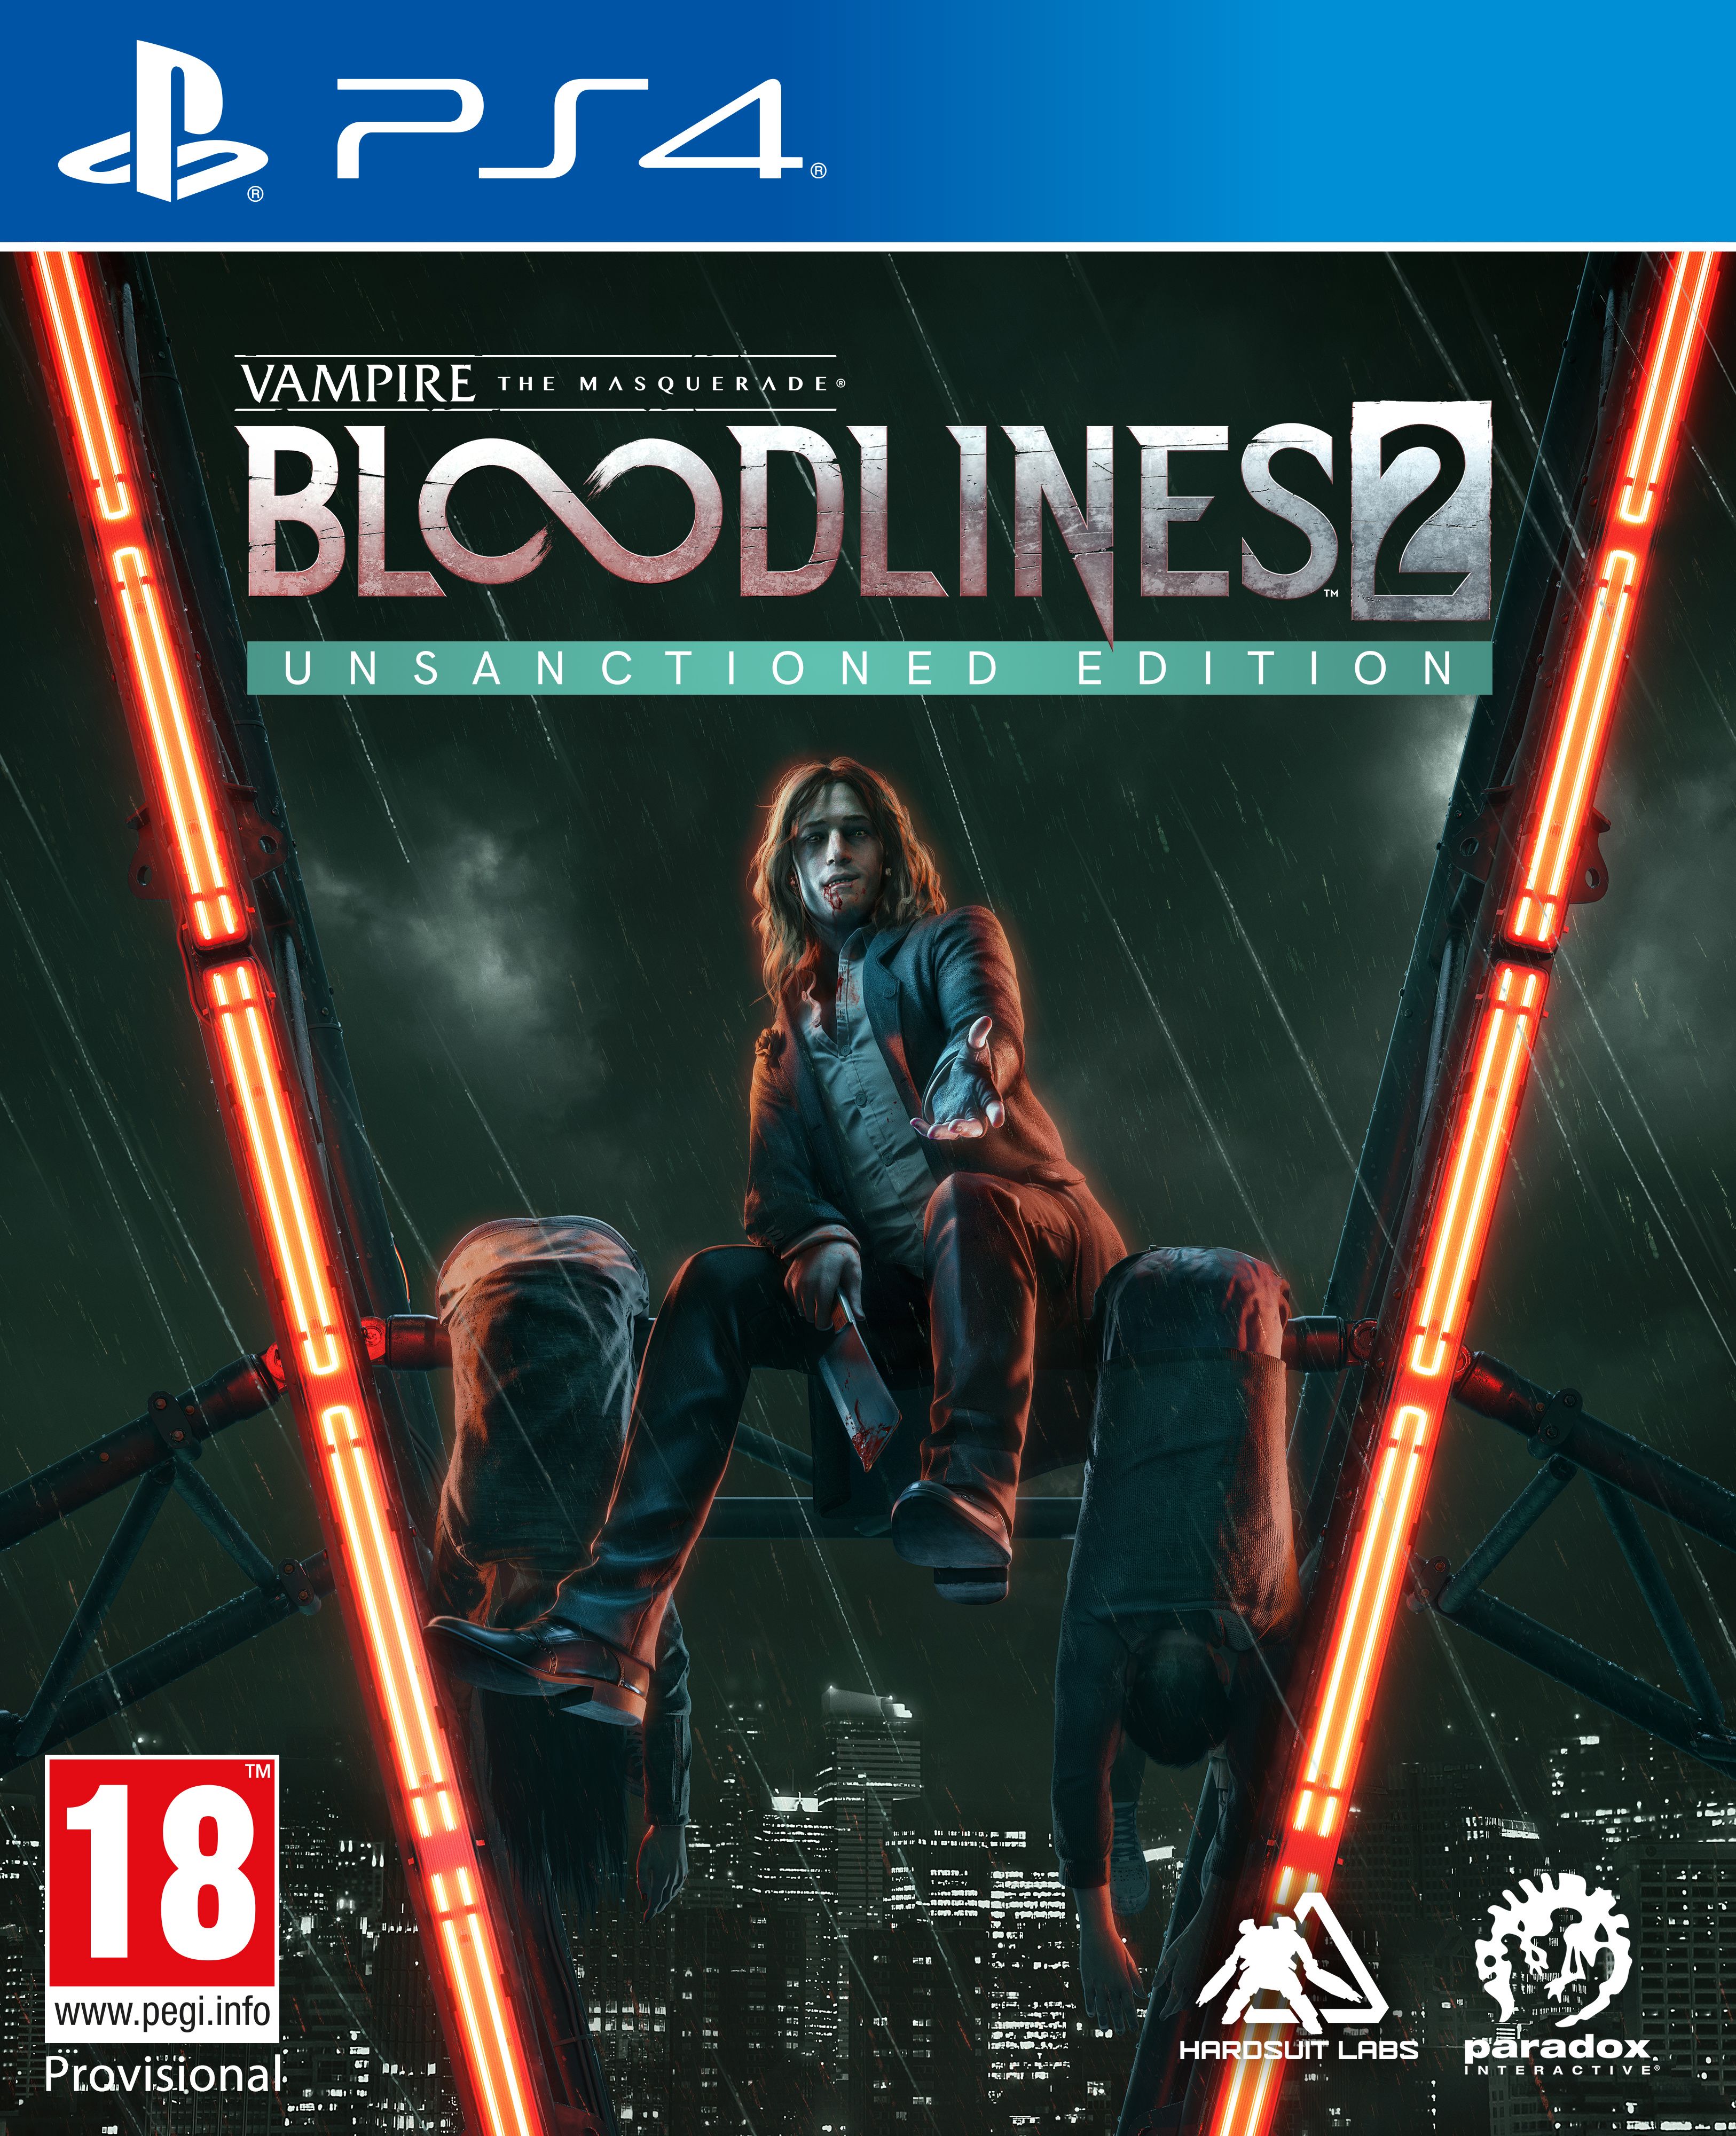 Vampire : The Masquerade Bloodlines 2 - Unsanctioned Edition